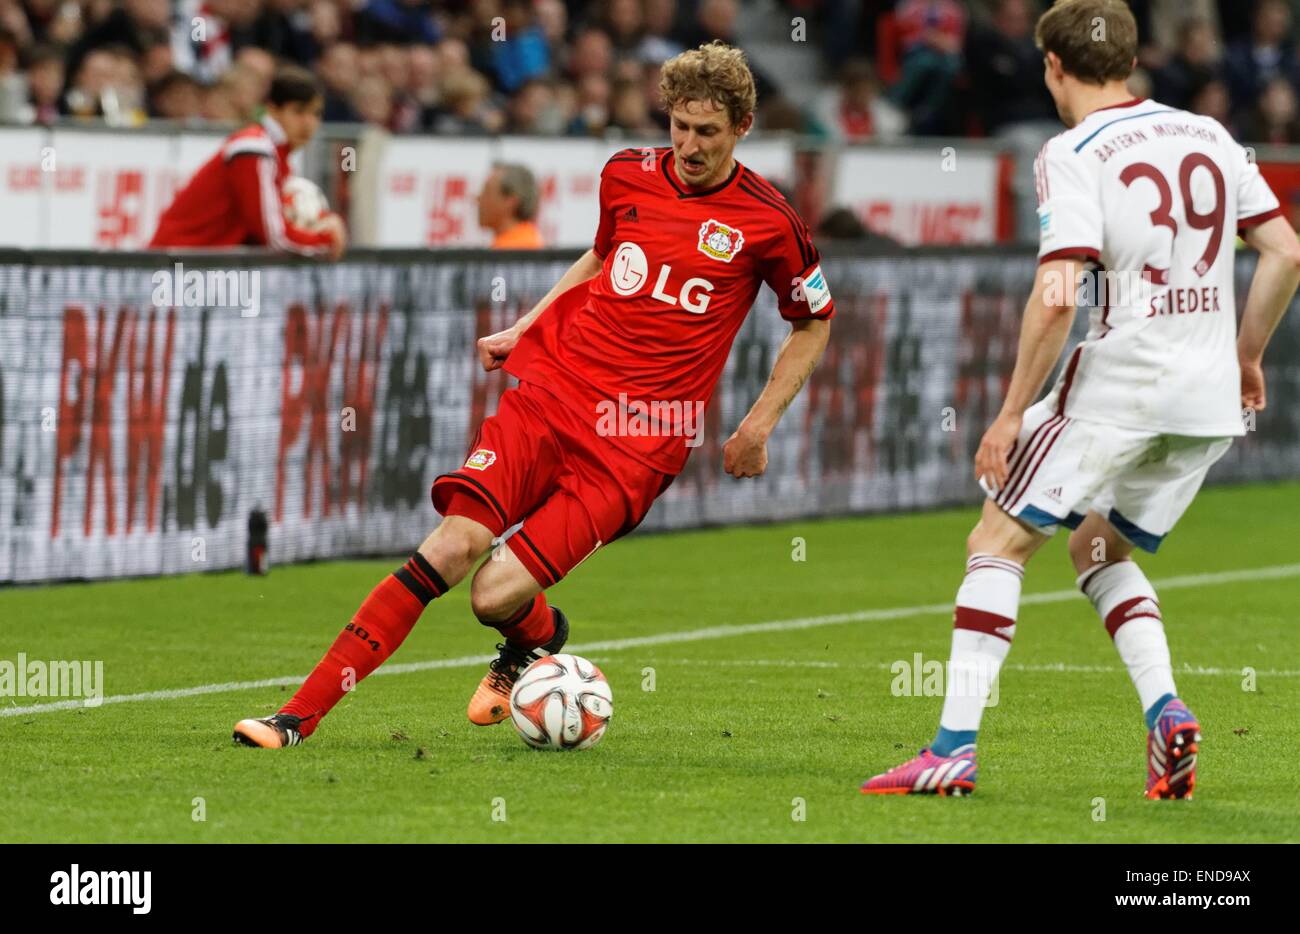 Leverkusen, Germany, 1st October, 2014. UEFA Champions League 2014/2015  Group stage Group C matchday 2, Bayer 04 Leverkusen (red) - Benfica  Lissabon (black) --- Heung-Min Son (Leverkusen) and Stefan Kie§ling  (Kiessling) (Leverkusen)